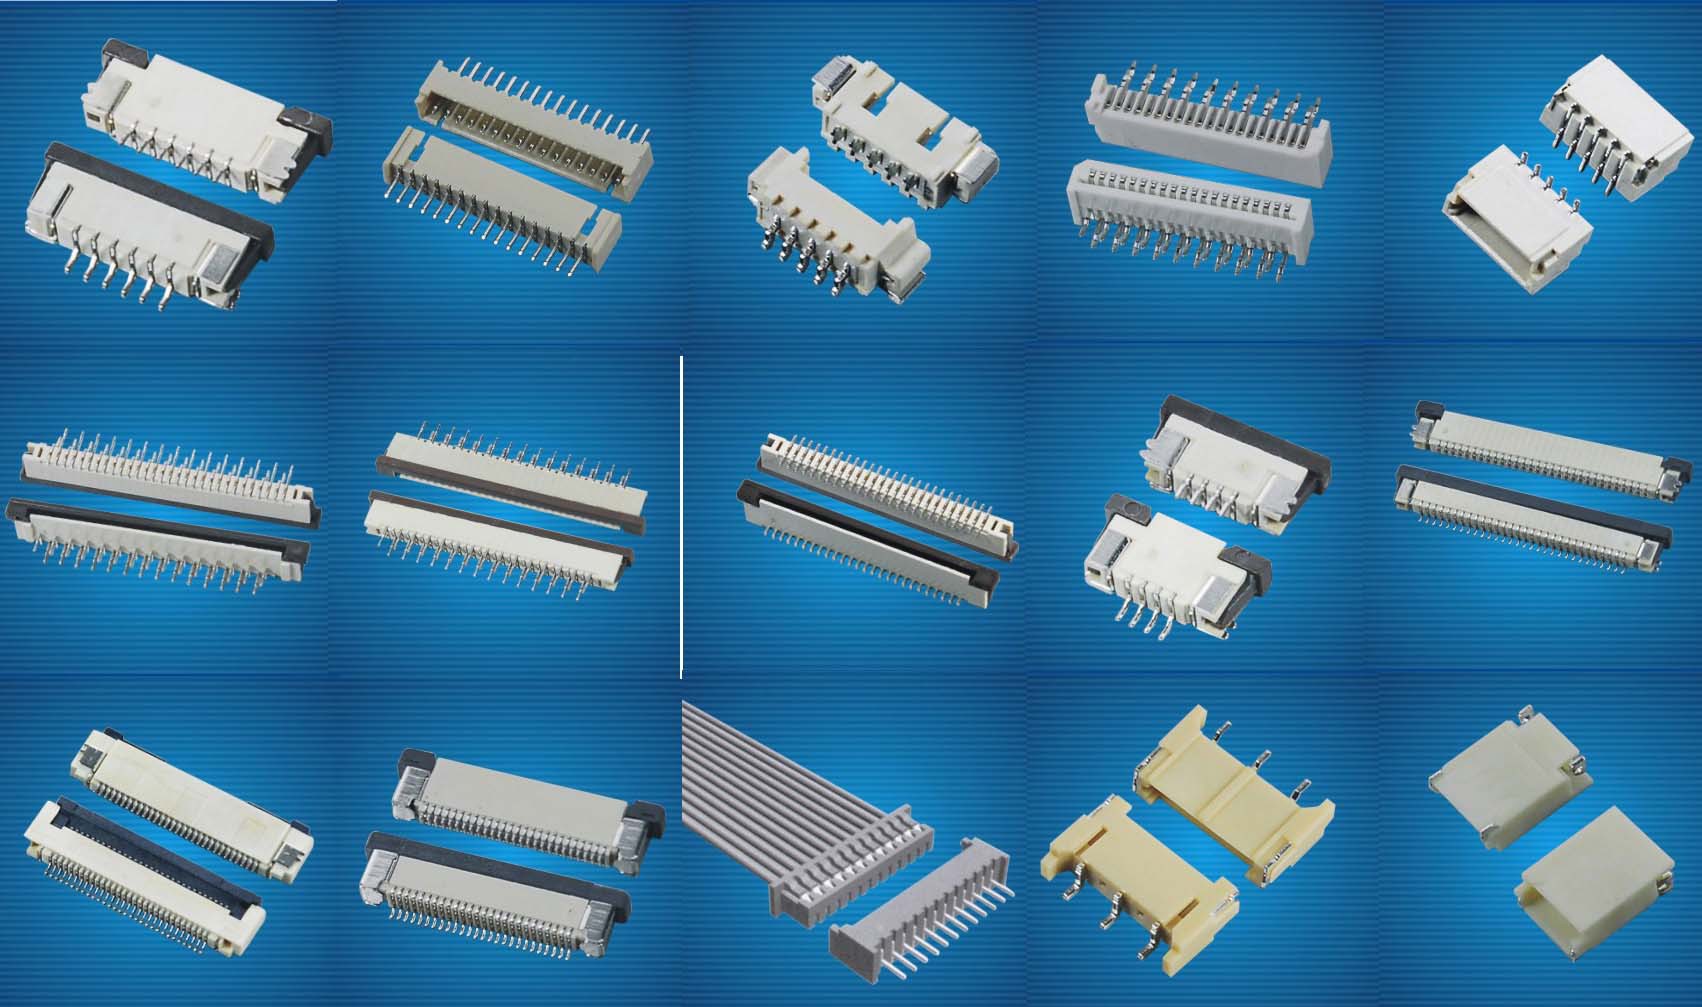 What Is A Connector? What Are The Classifications Of Connectors?